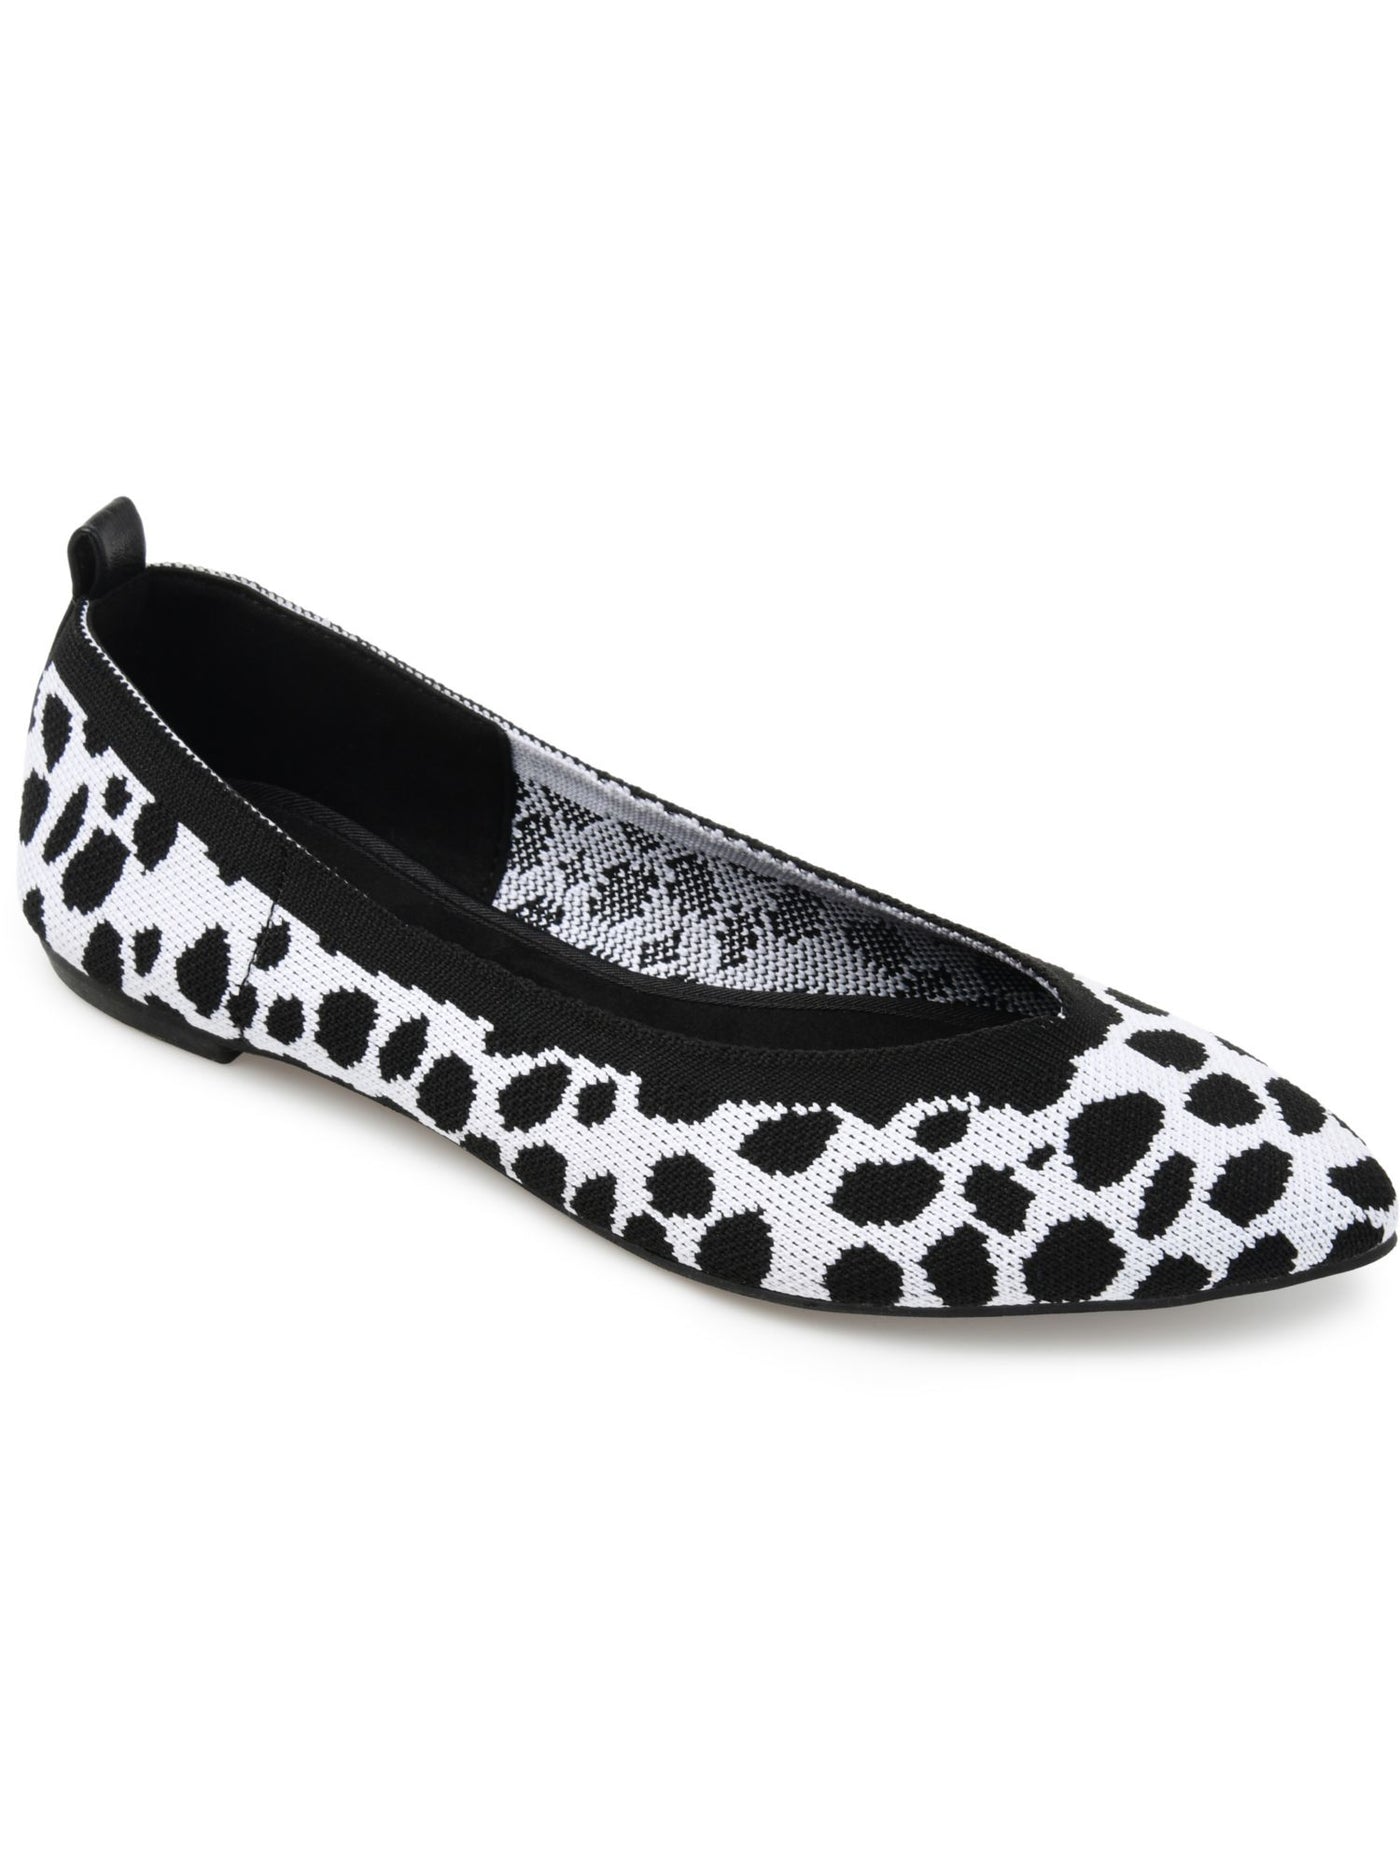 JOURNEE COLLECTION Womens Black Dalmation Traction Sole Pull Tab Studded Padded Karise Pointed Toe Slip On Ballet Flats 9